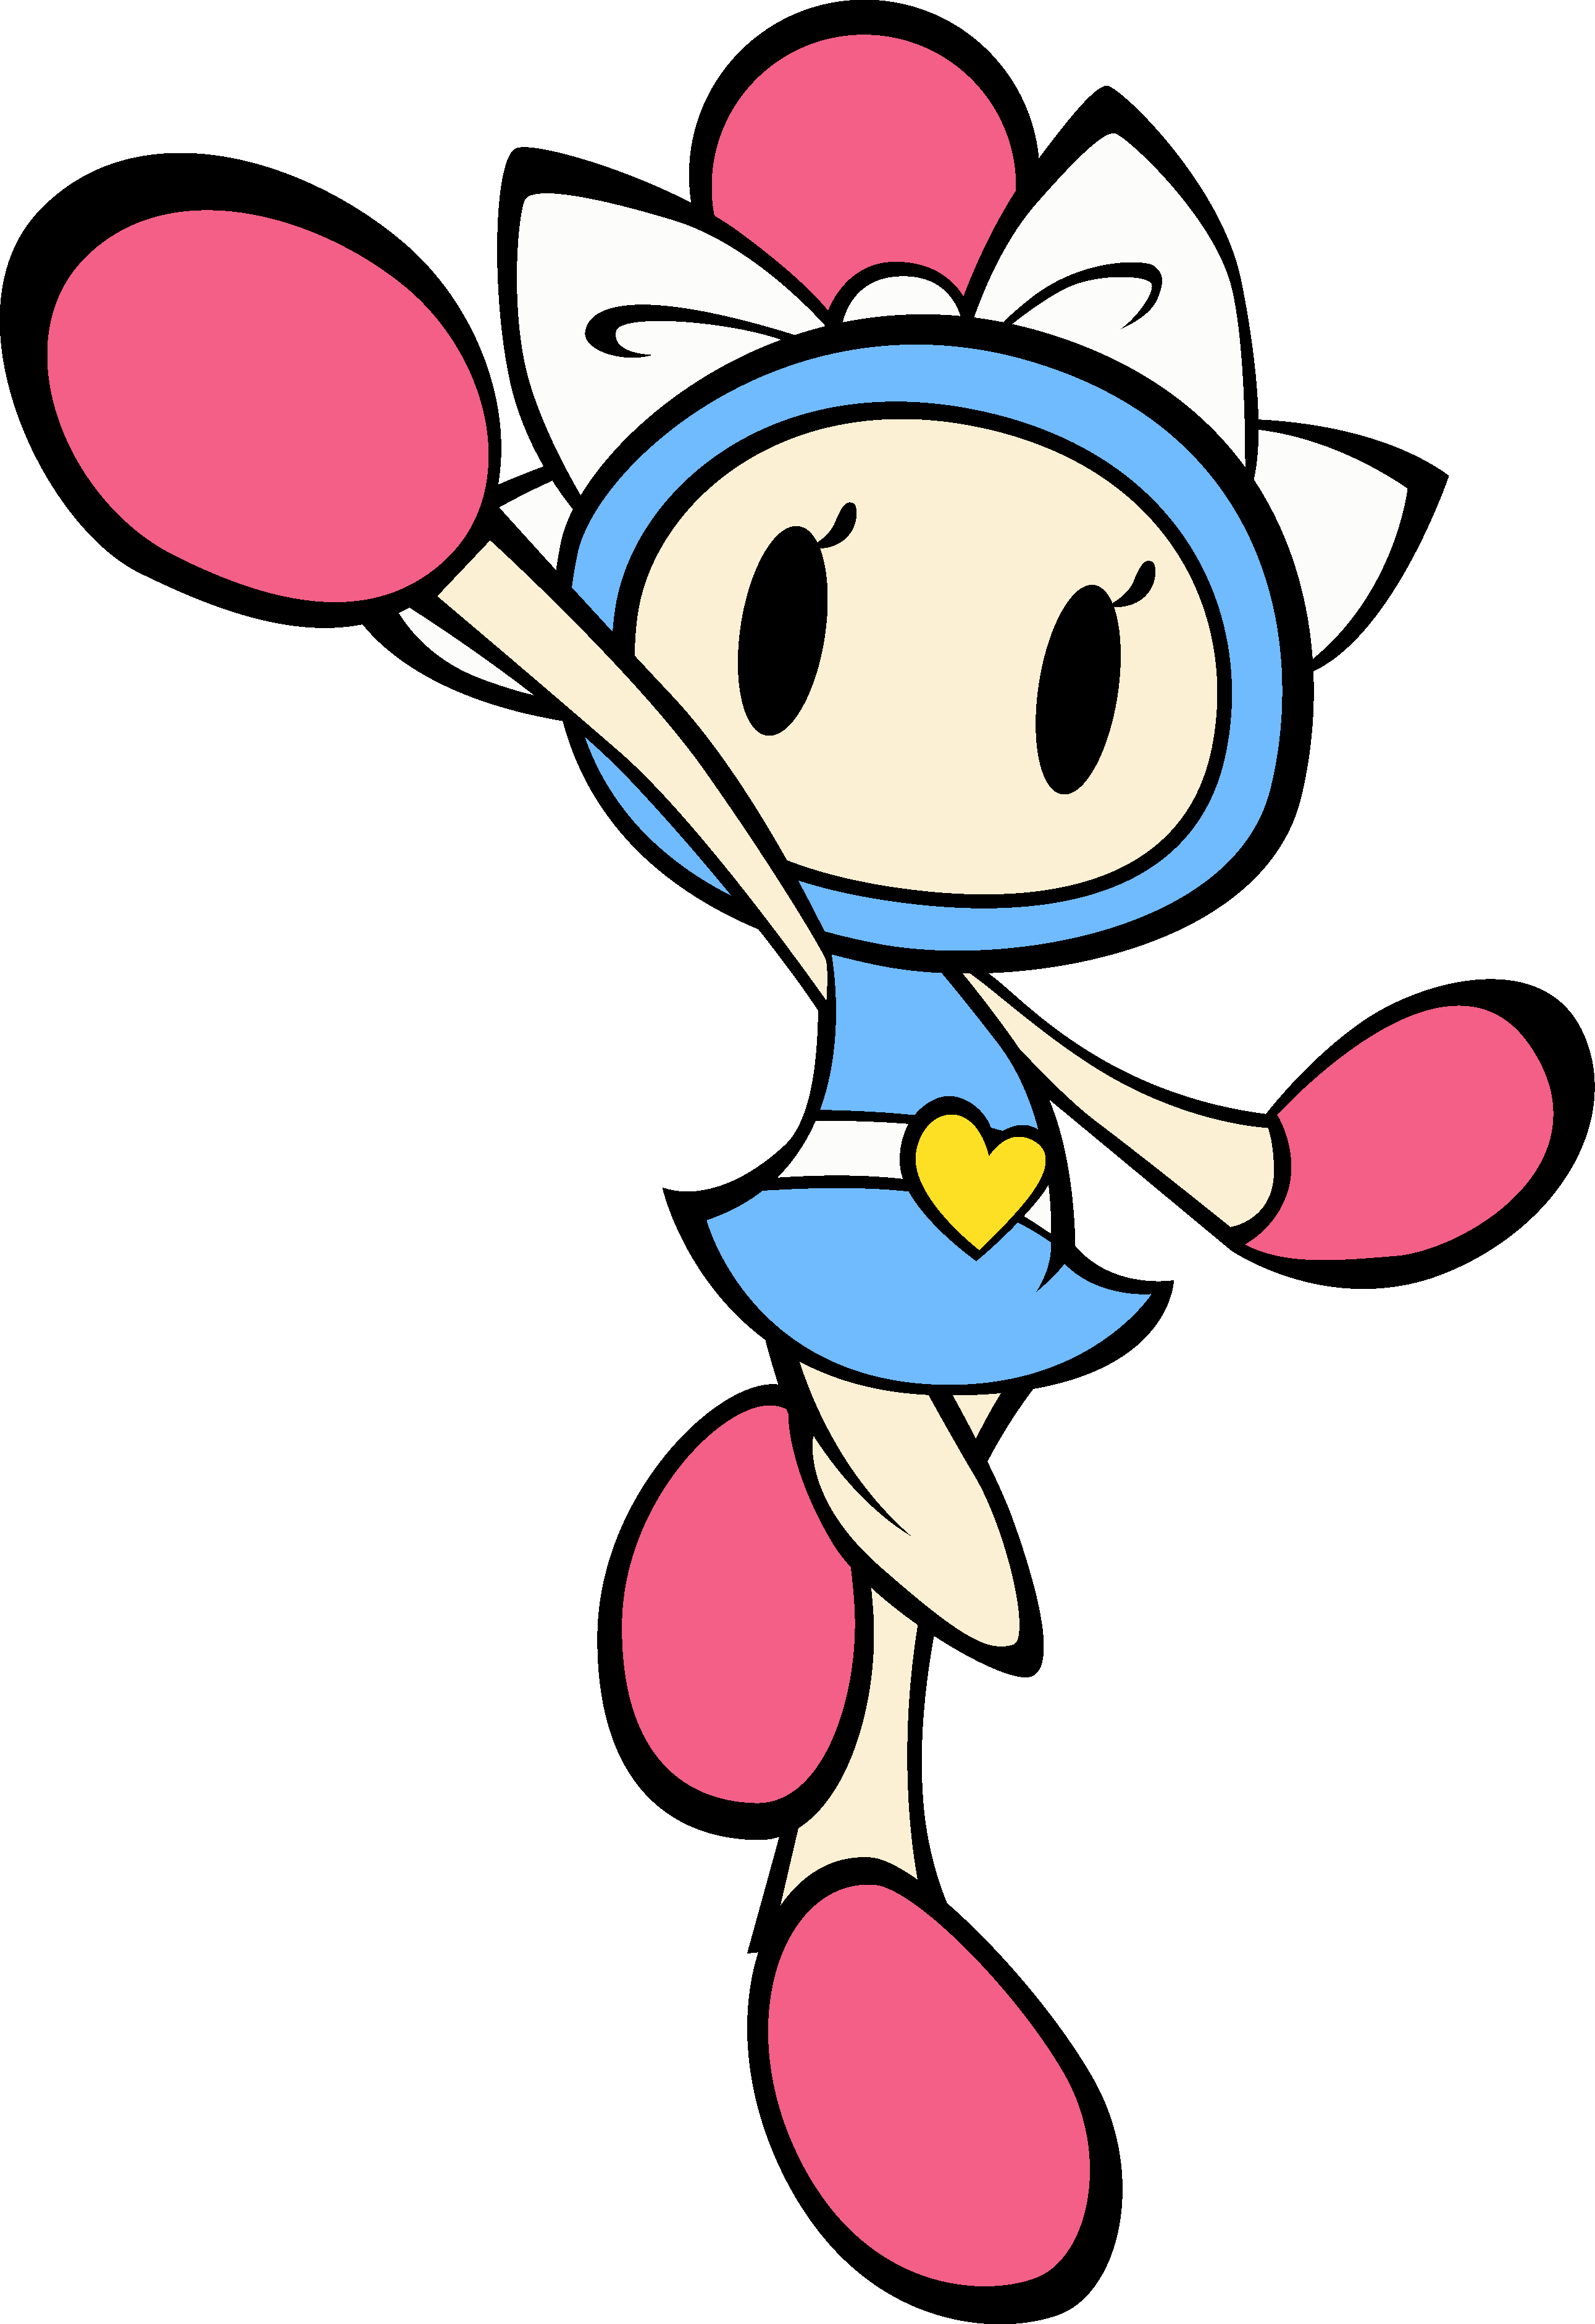 I Nominate Red Bomber And - Bomberman (2583x3763)